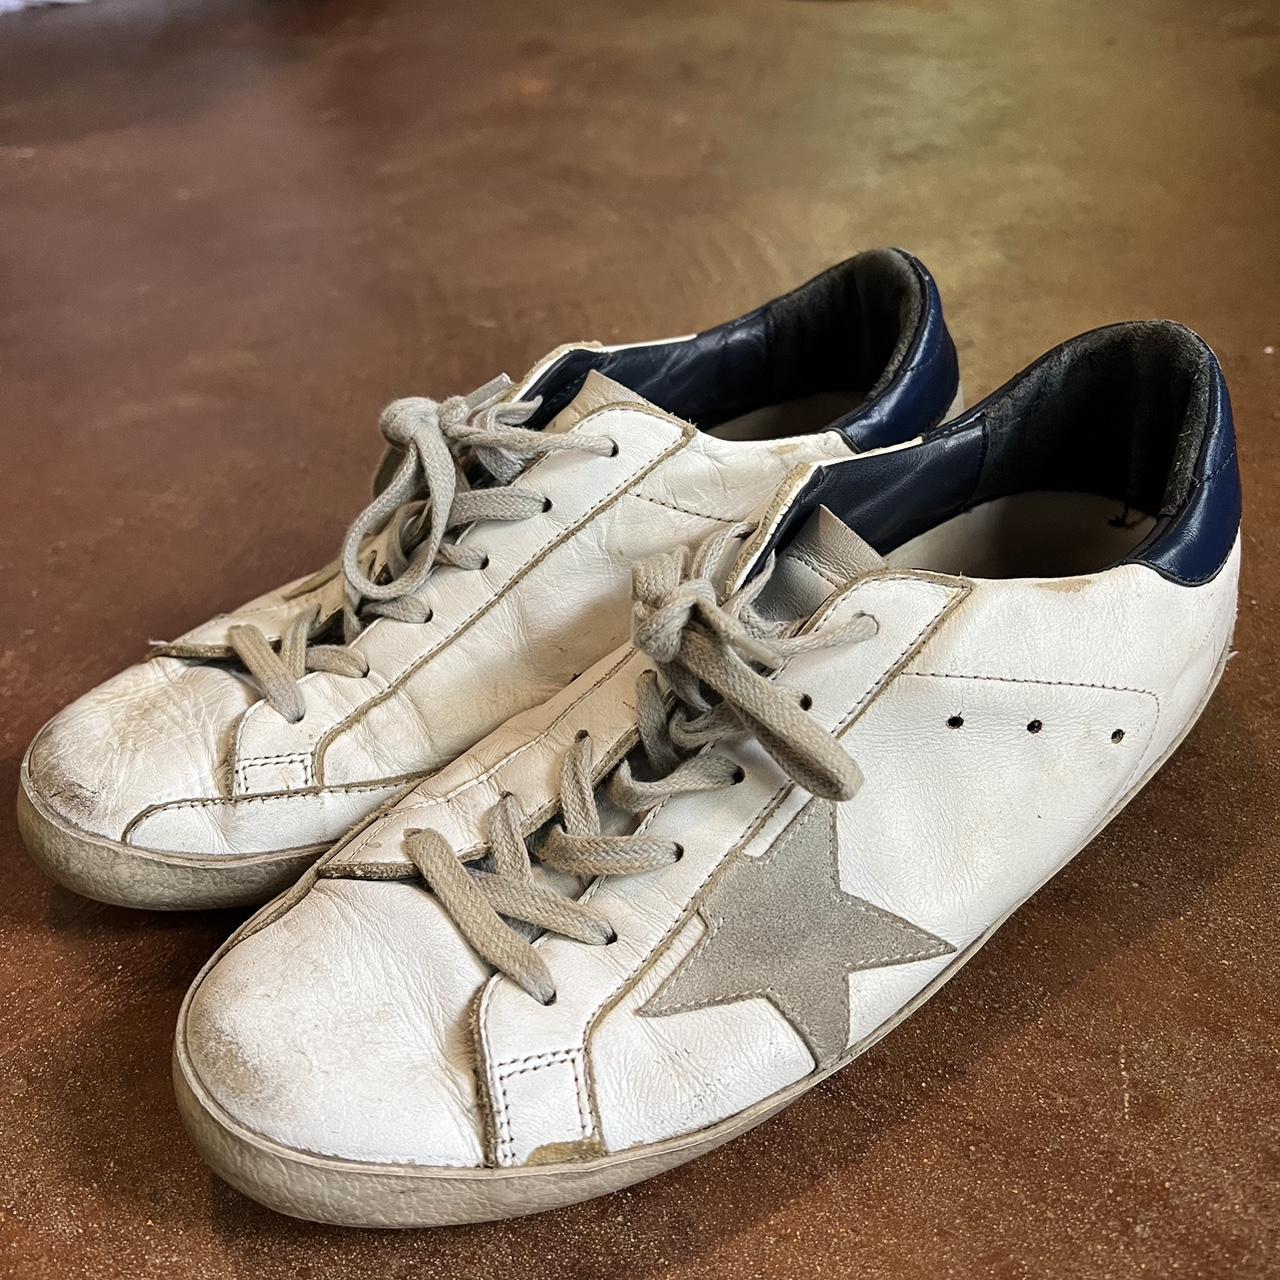 Golden Goose Women's White and Navy Trainers